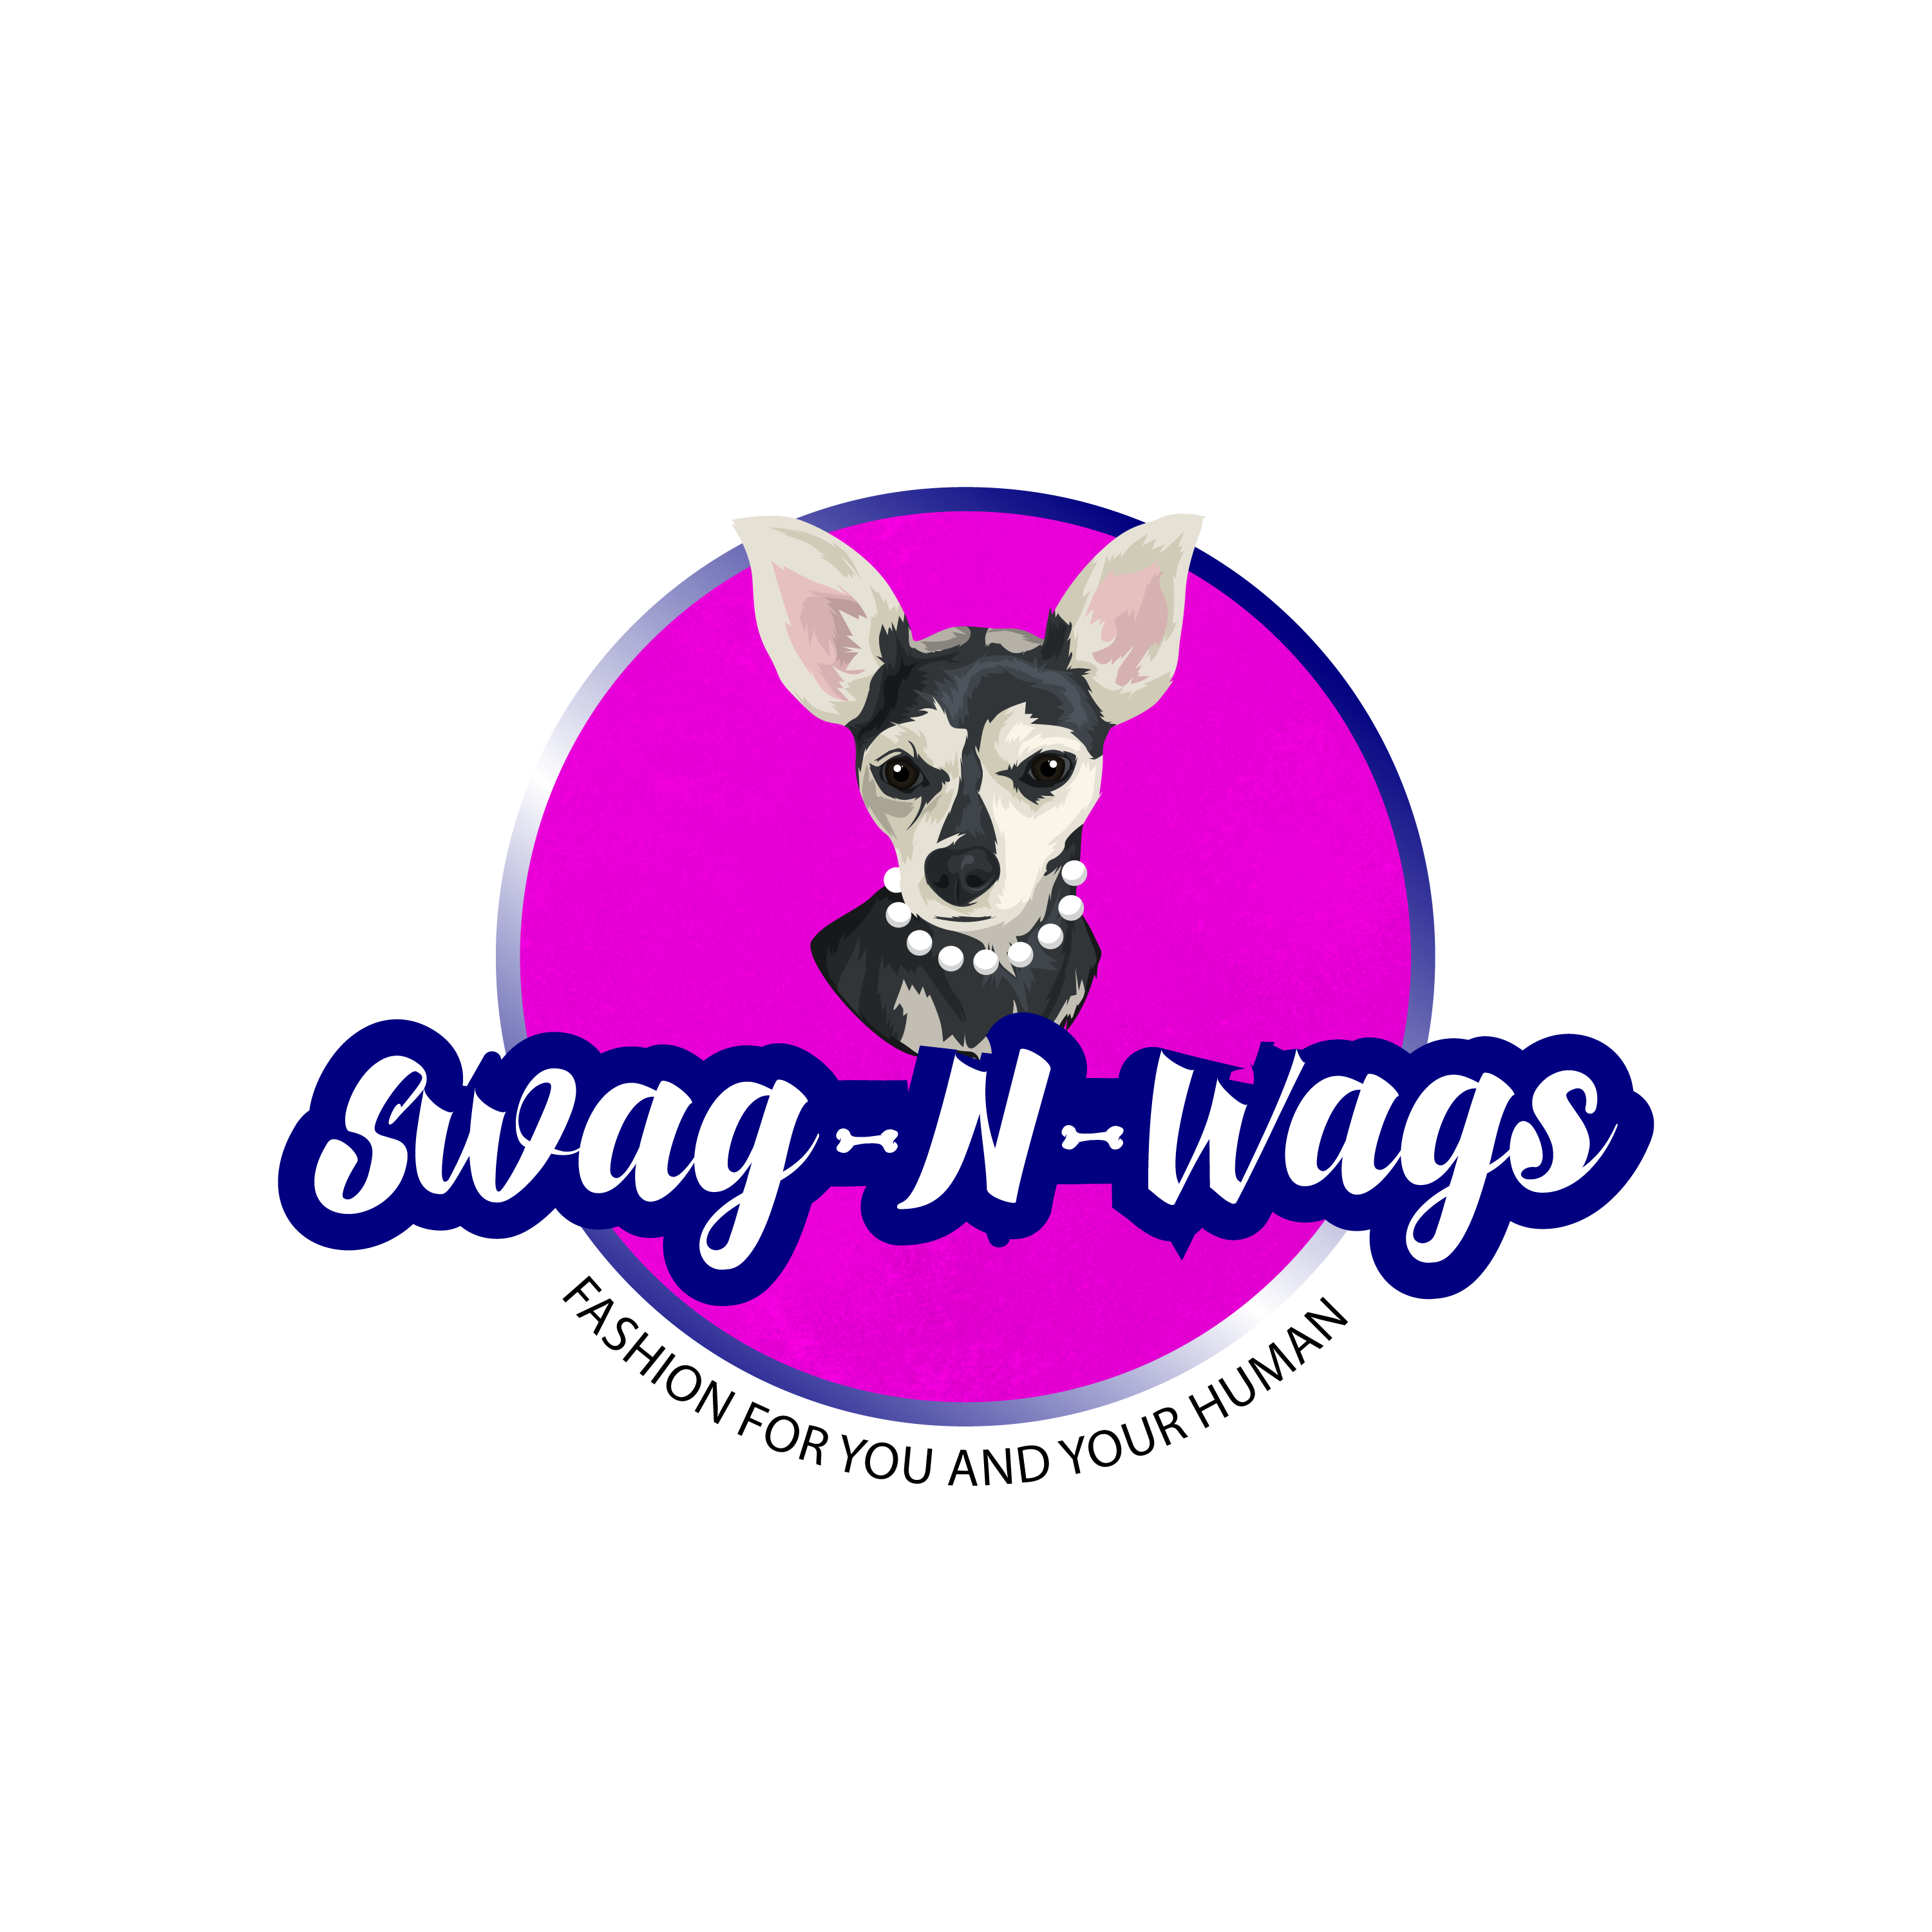 Swag-N-Wags